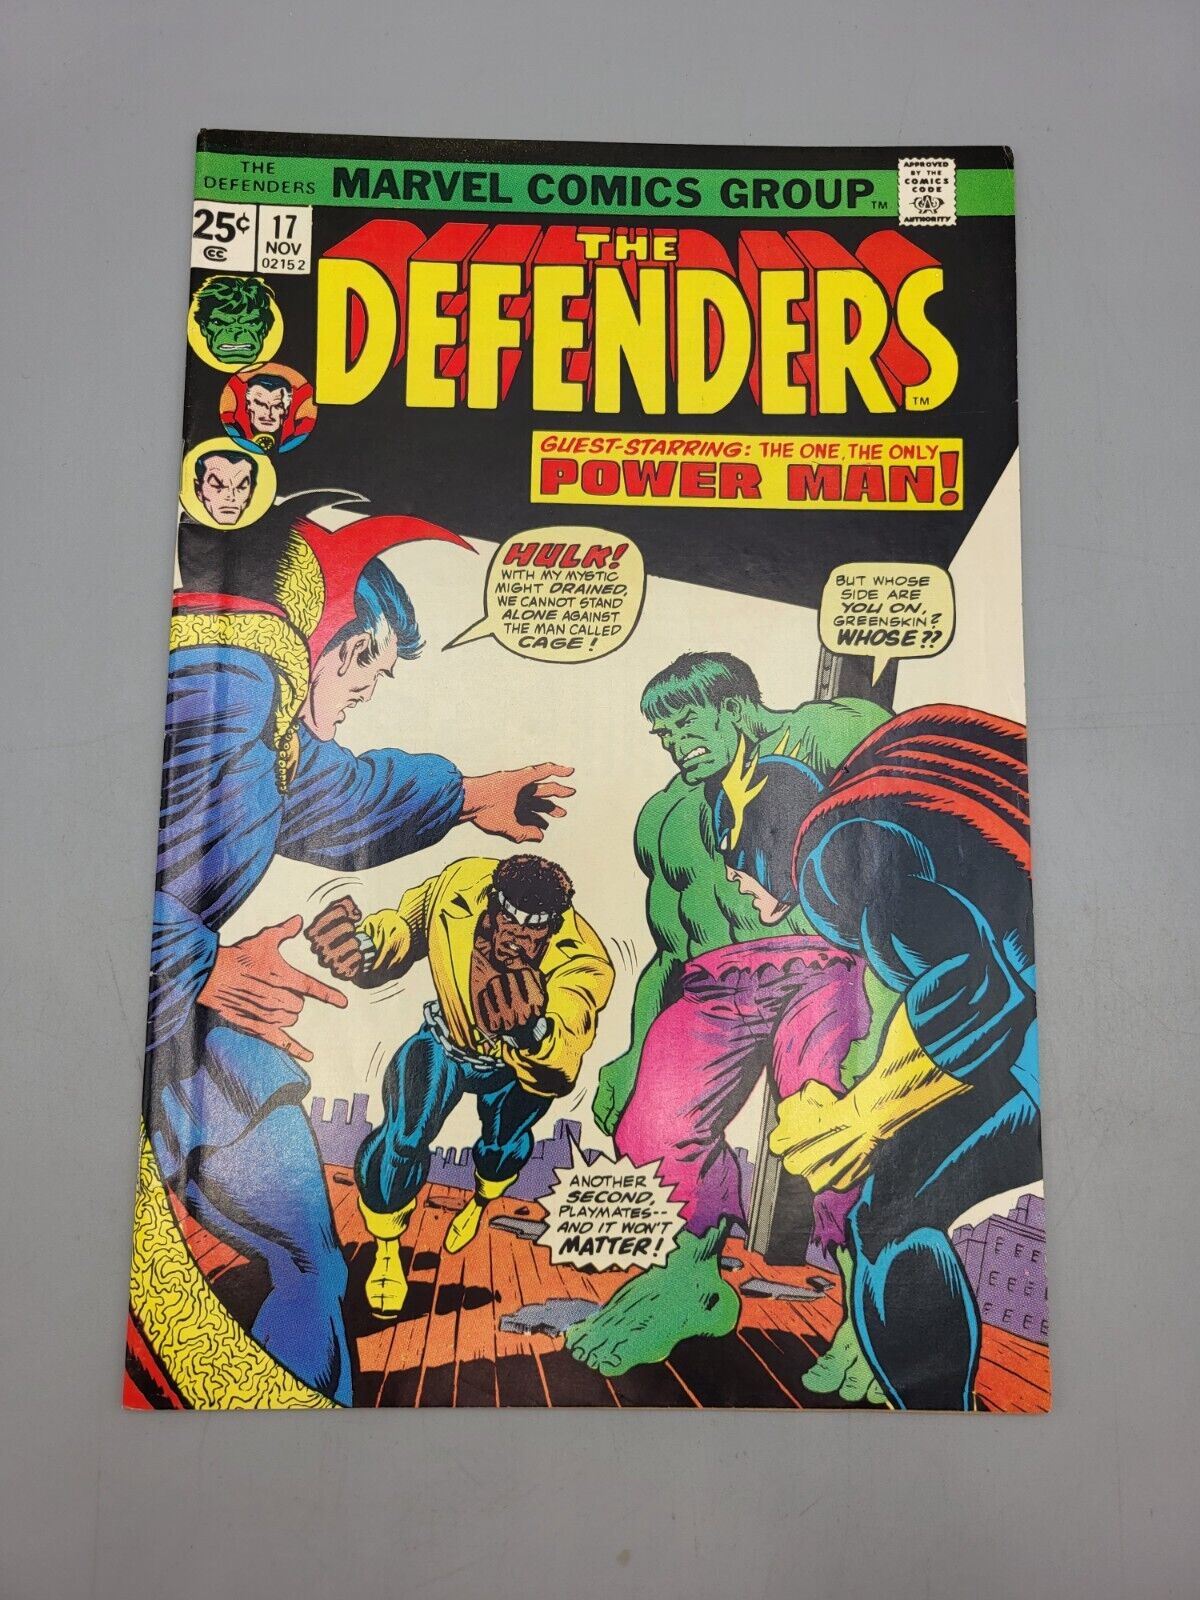 The Defenders Vol 1 #17 November 1974 Power Play Illustrated Marvel Comic Book